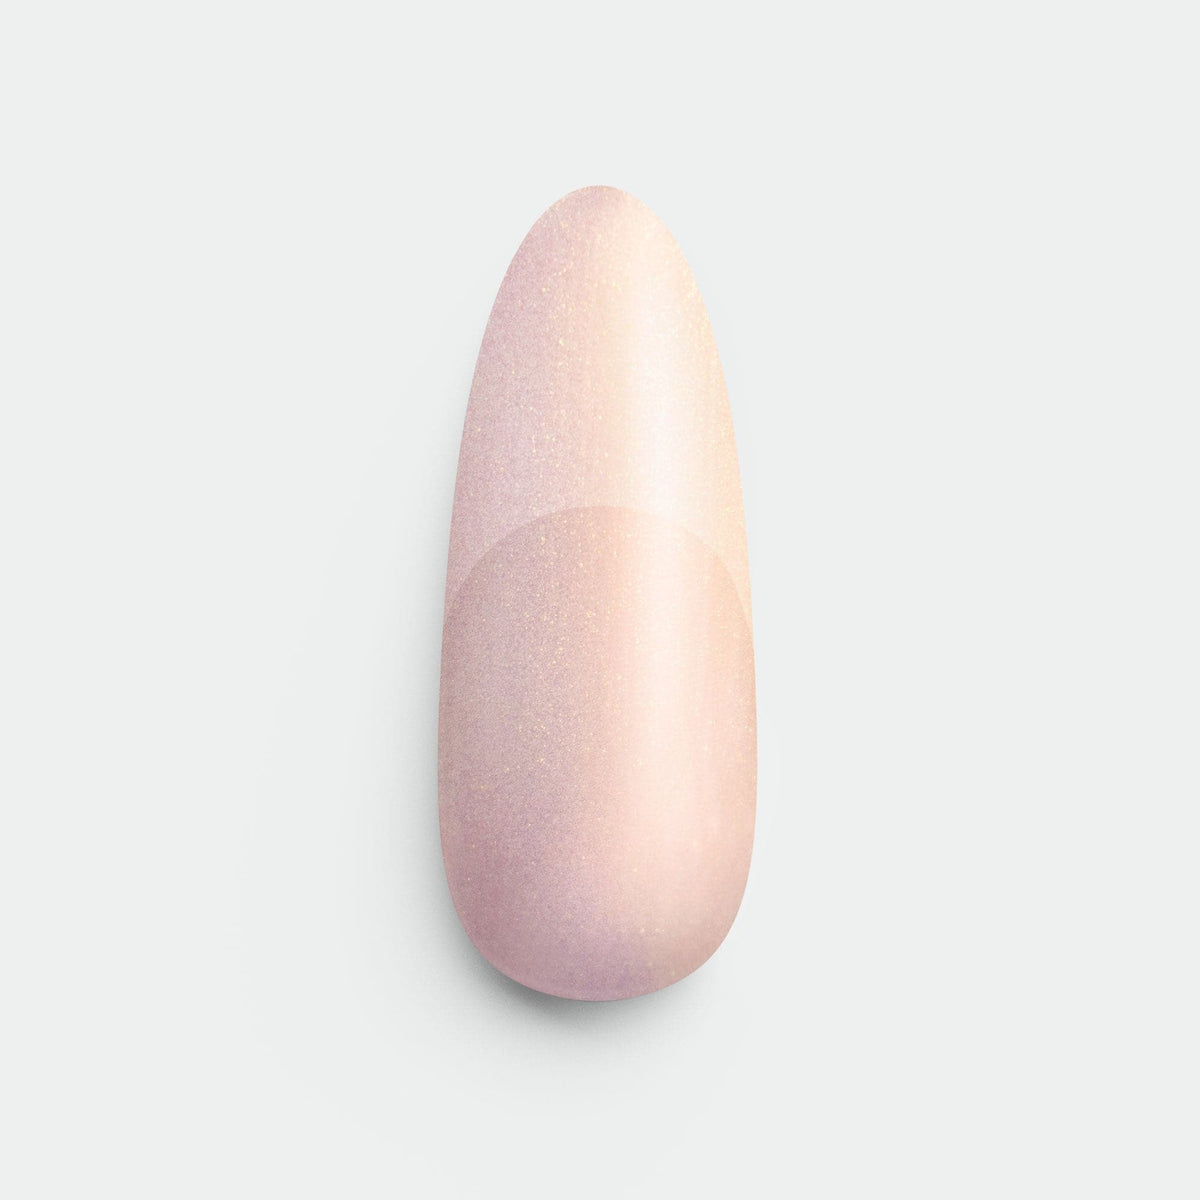 Gelous Pearlescent Rose Quartz gel nail polish swatch - photographed in America